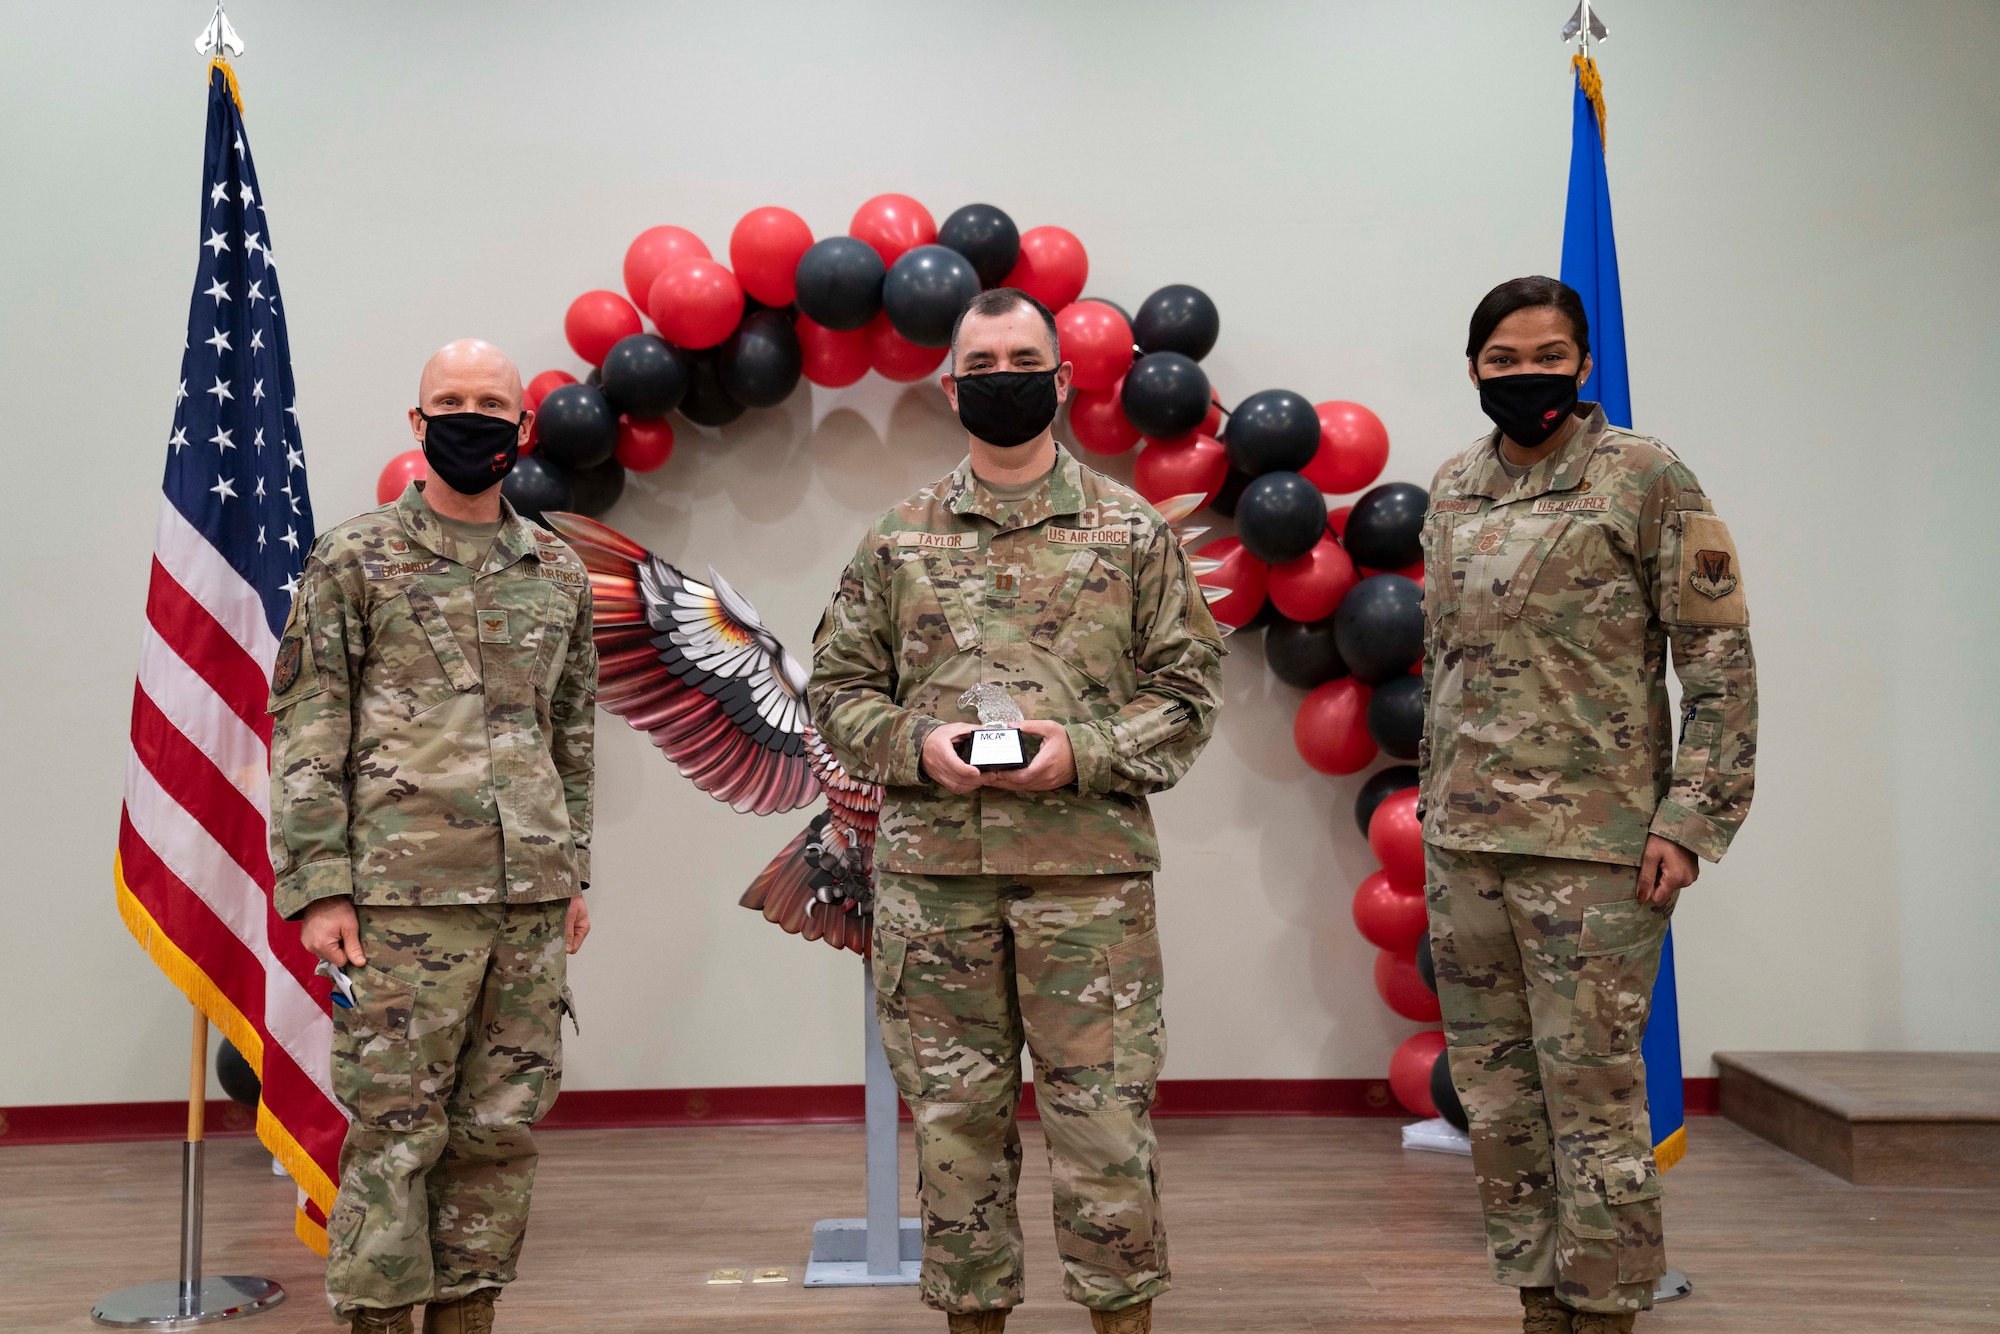 Capt. James Taylor stands in between Col. Eric C. Schmidt and Chief Master Sgt. Adrienne Warren as he holds his award at stomach level. the award is an shape of an American eagle head, facing left, made of glass with a wood plaque at the bottom with the award's name, his name and a "Thank you for your ministry!"